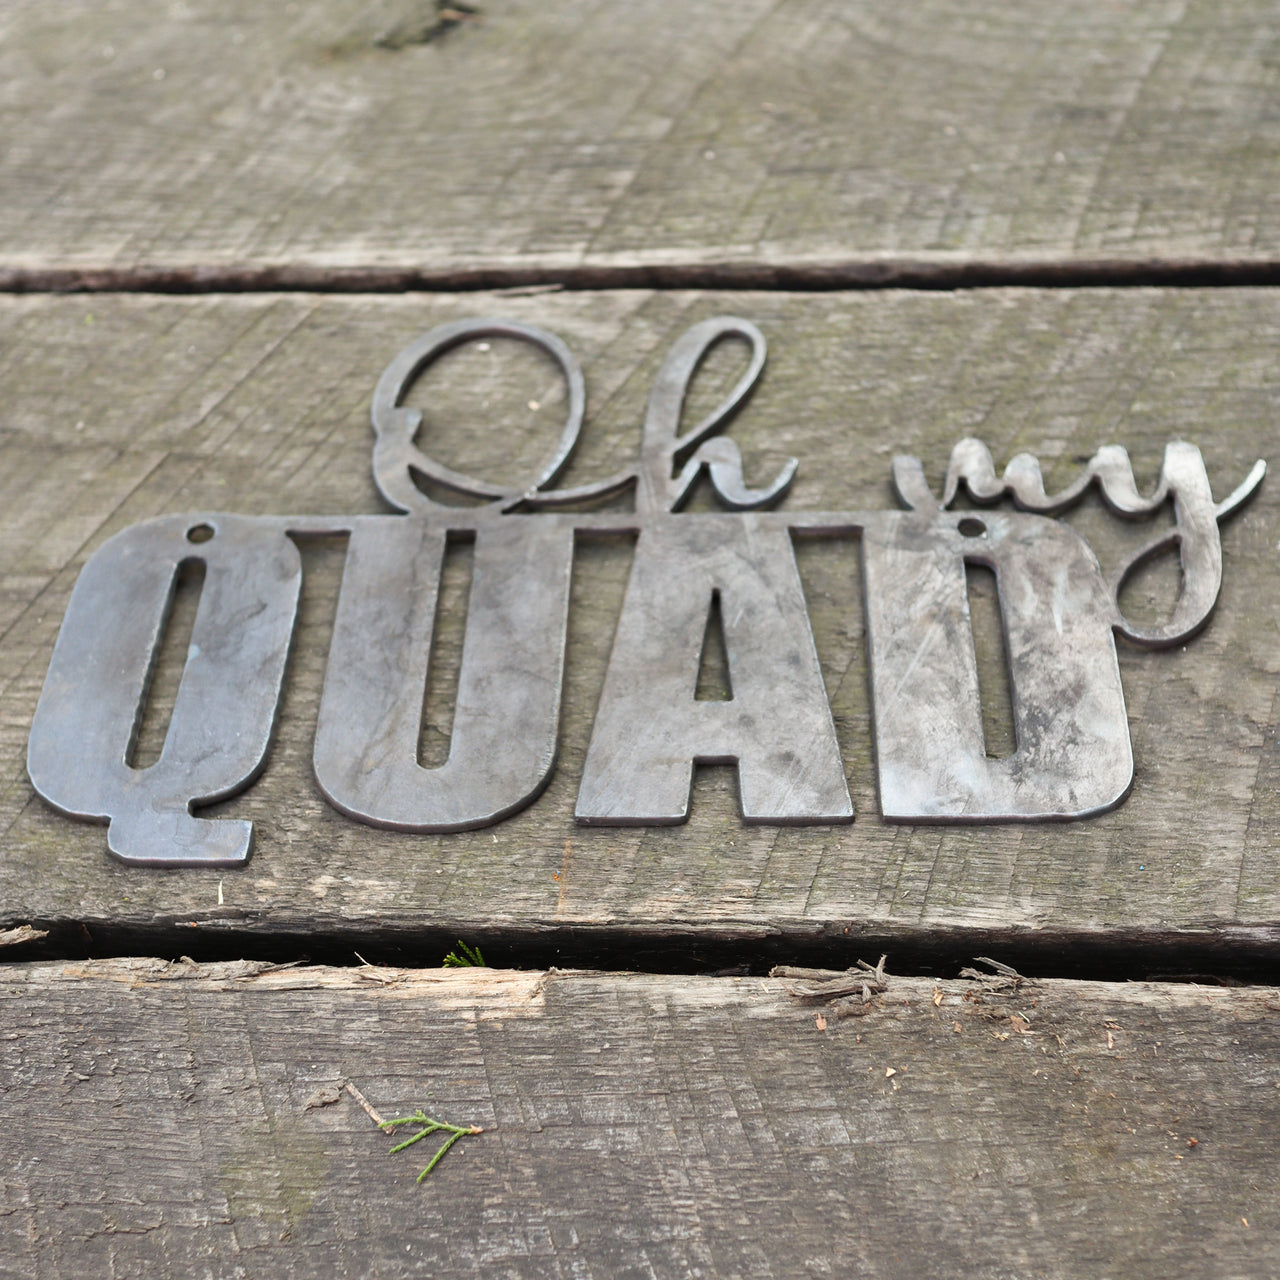 Oh my Quad! Wall Art - Home Gym Decor - Workout Inspiration Metal Sign - Fitness Quote Decor